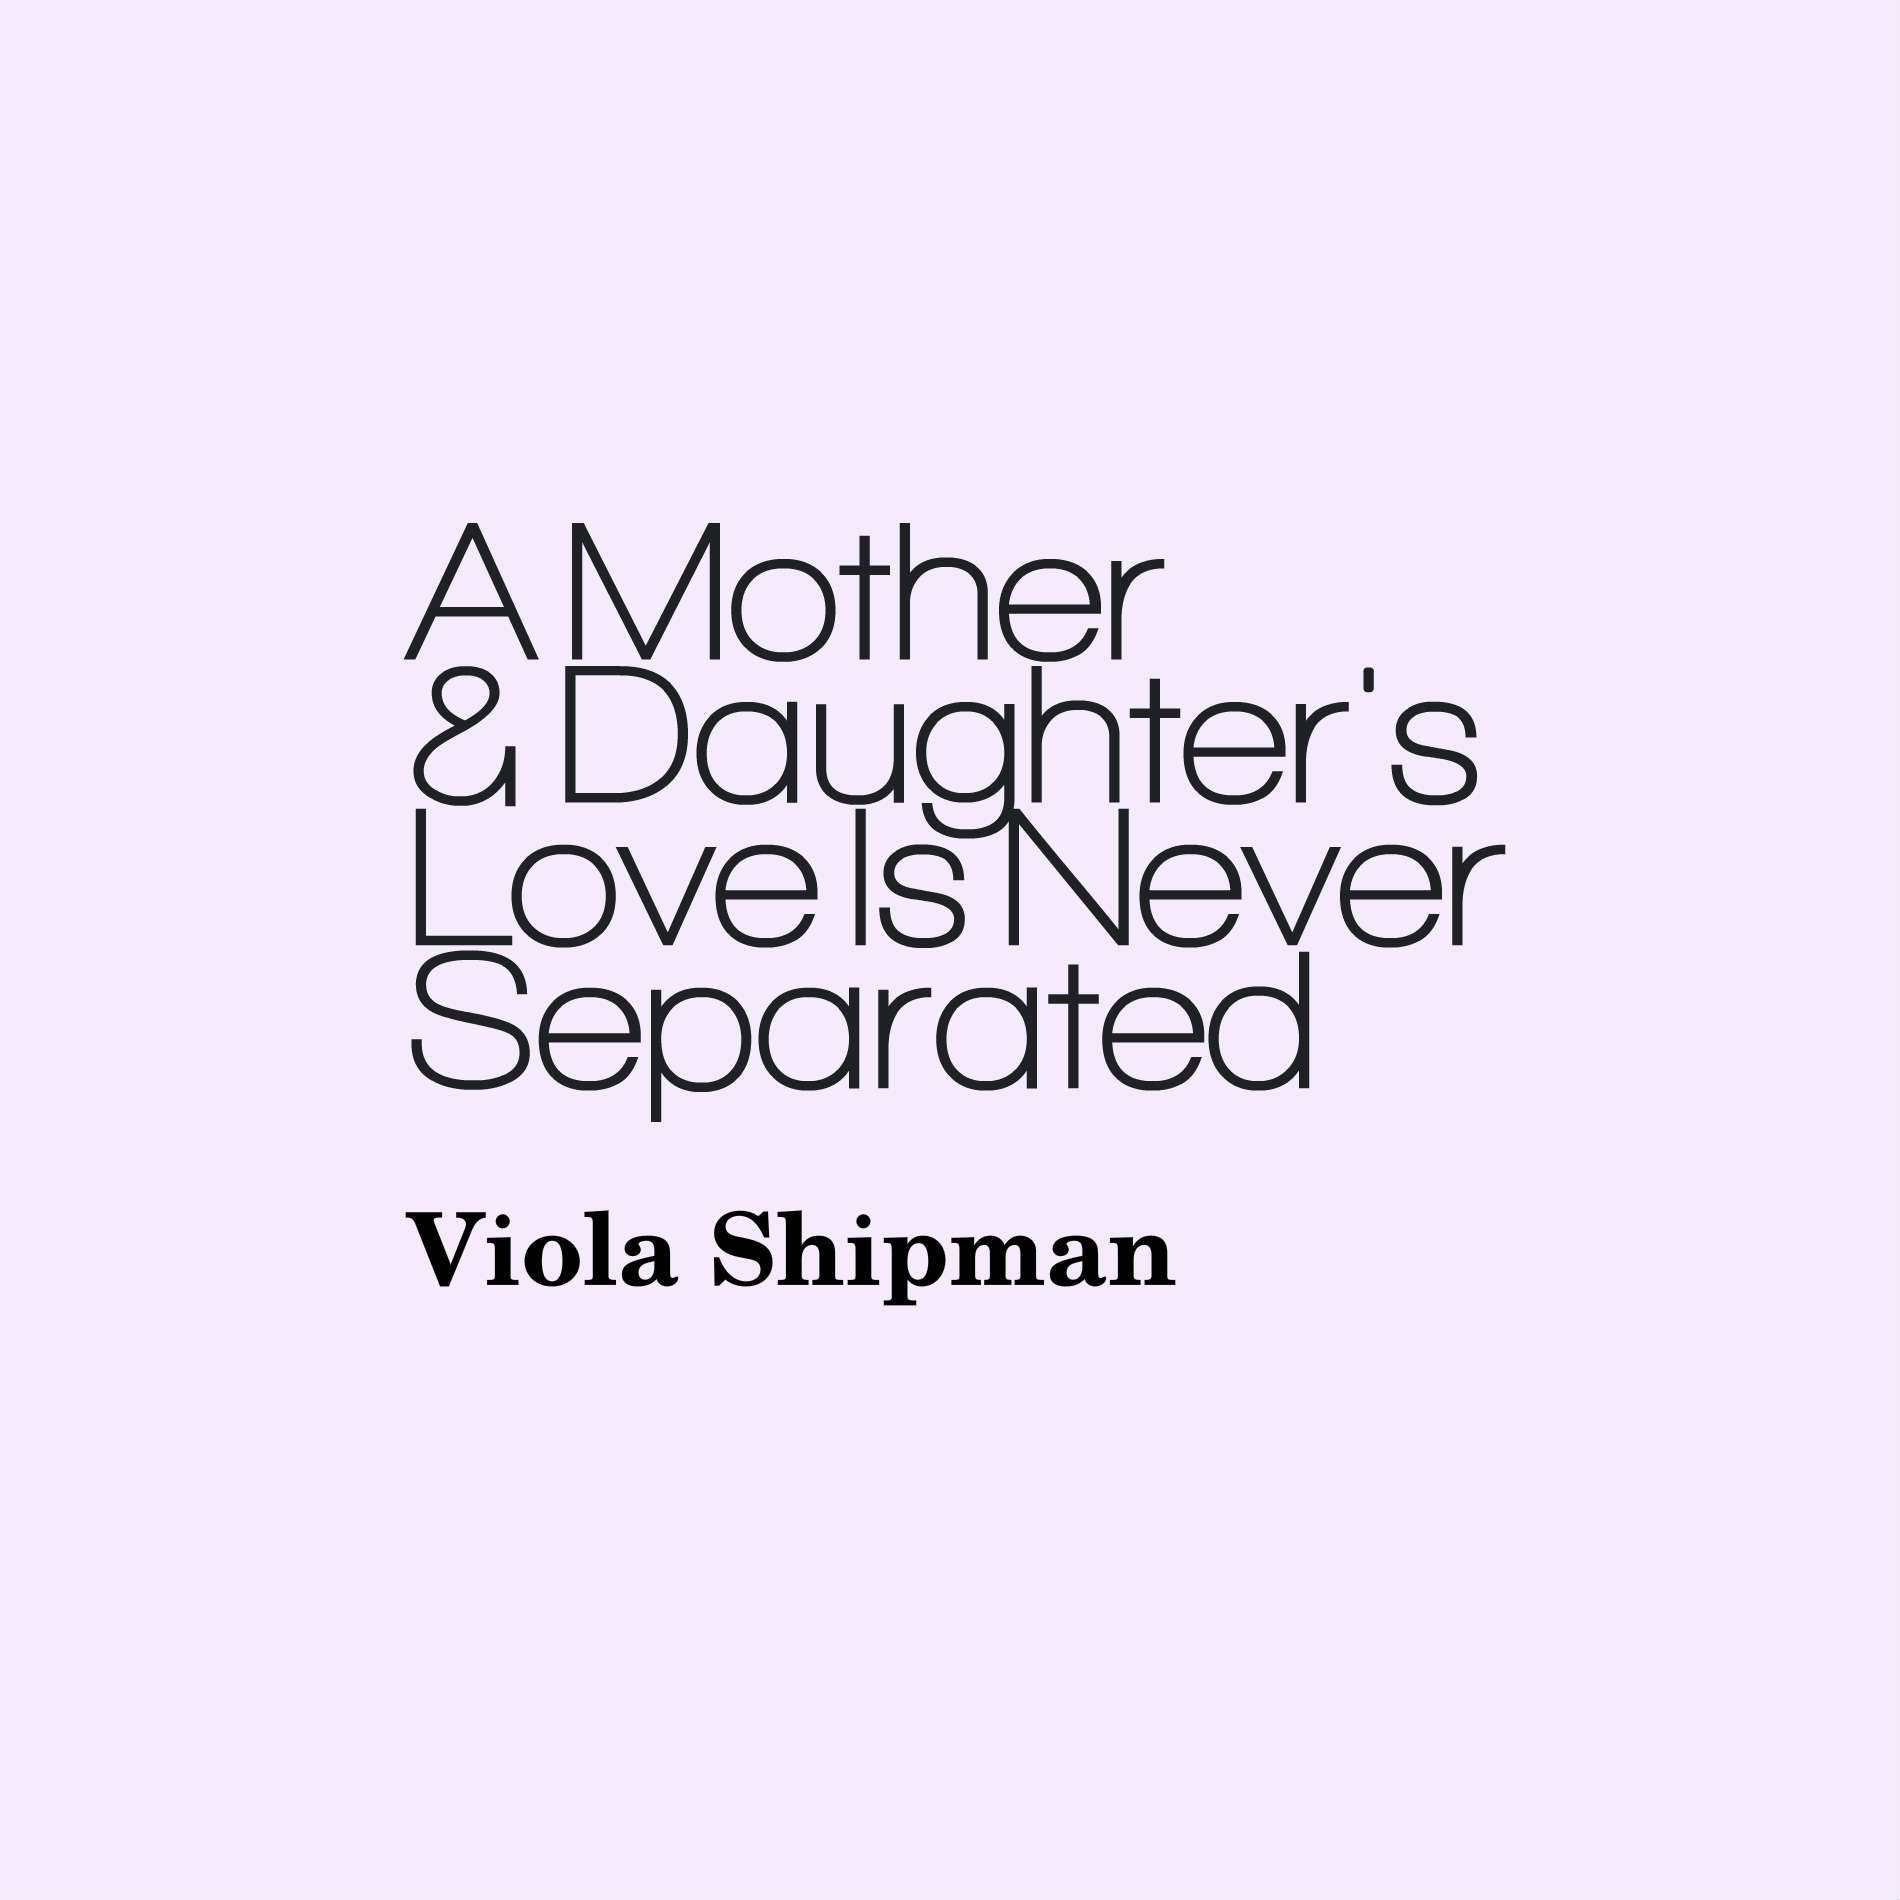 A Mother & Daughter's Love Is Never Separated